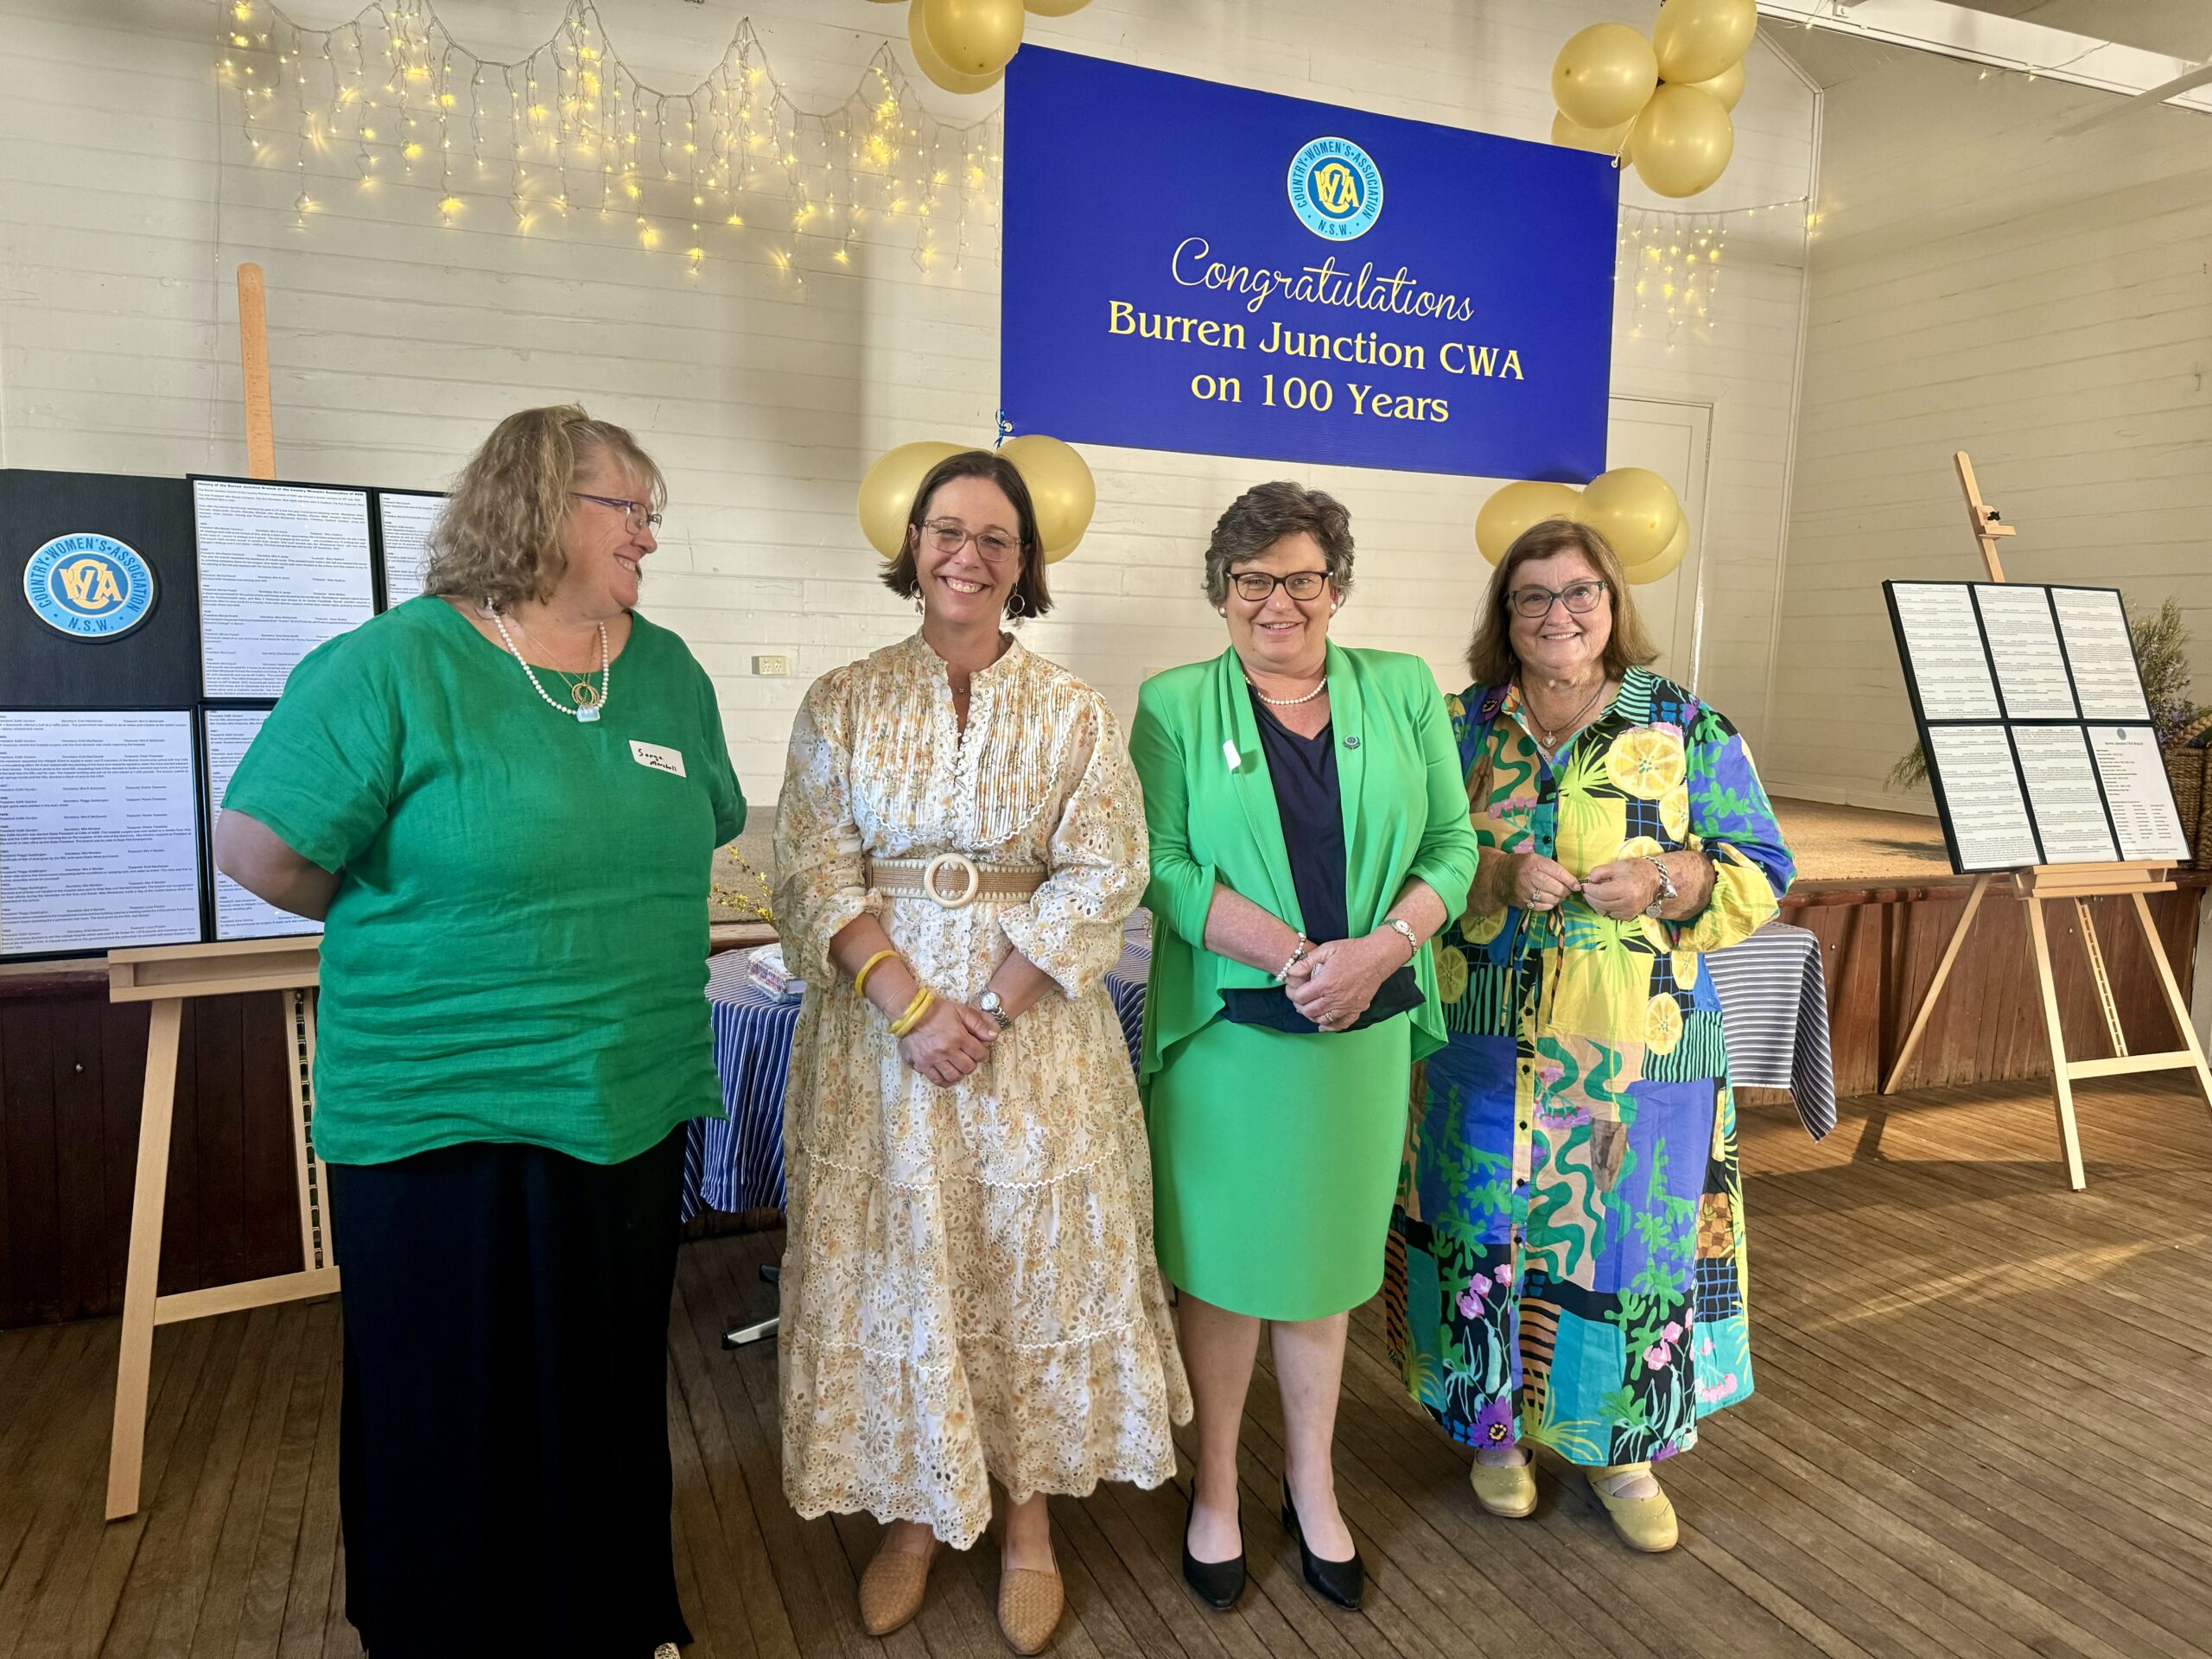 Long service badges were presented to CWA members, Sonya Marshall, Genevieve Sendall, Sally Croft, Genevieve Sendall and Elizabeth Powell, who all play an important role in the community.